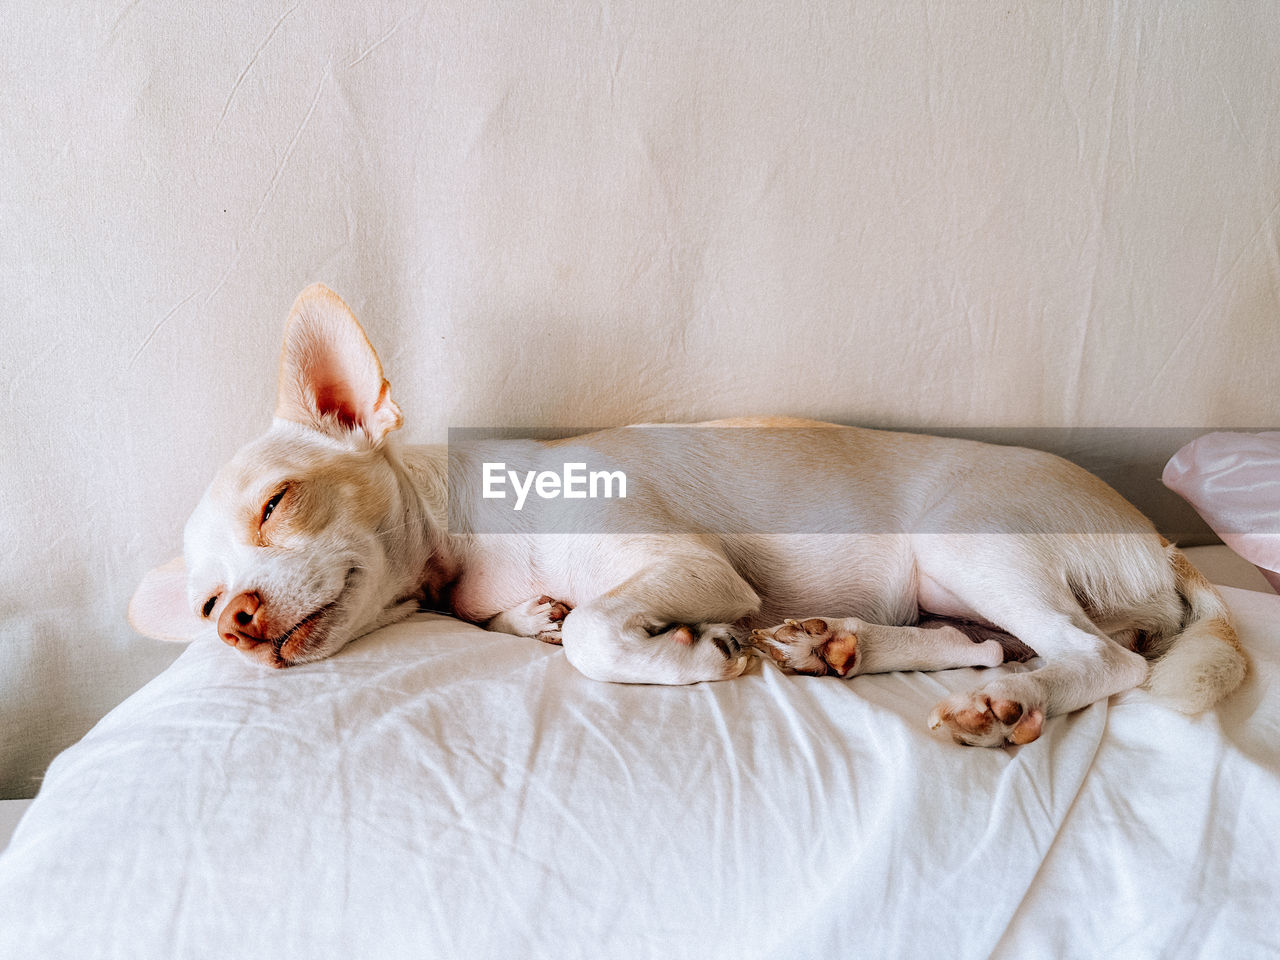 animal themes, pet, animal, mammal, domestic animals, one animal, dog, relaxation, indoors, sleeping, canine, furniture, lying down, no people, bed, lap dog, resting, eyes closed, chihuahua, white, carnivore, domestic room, cute, bedroom, tired, puppy, young animal